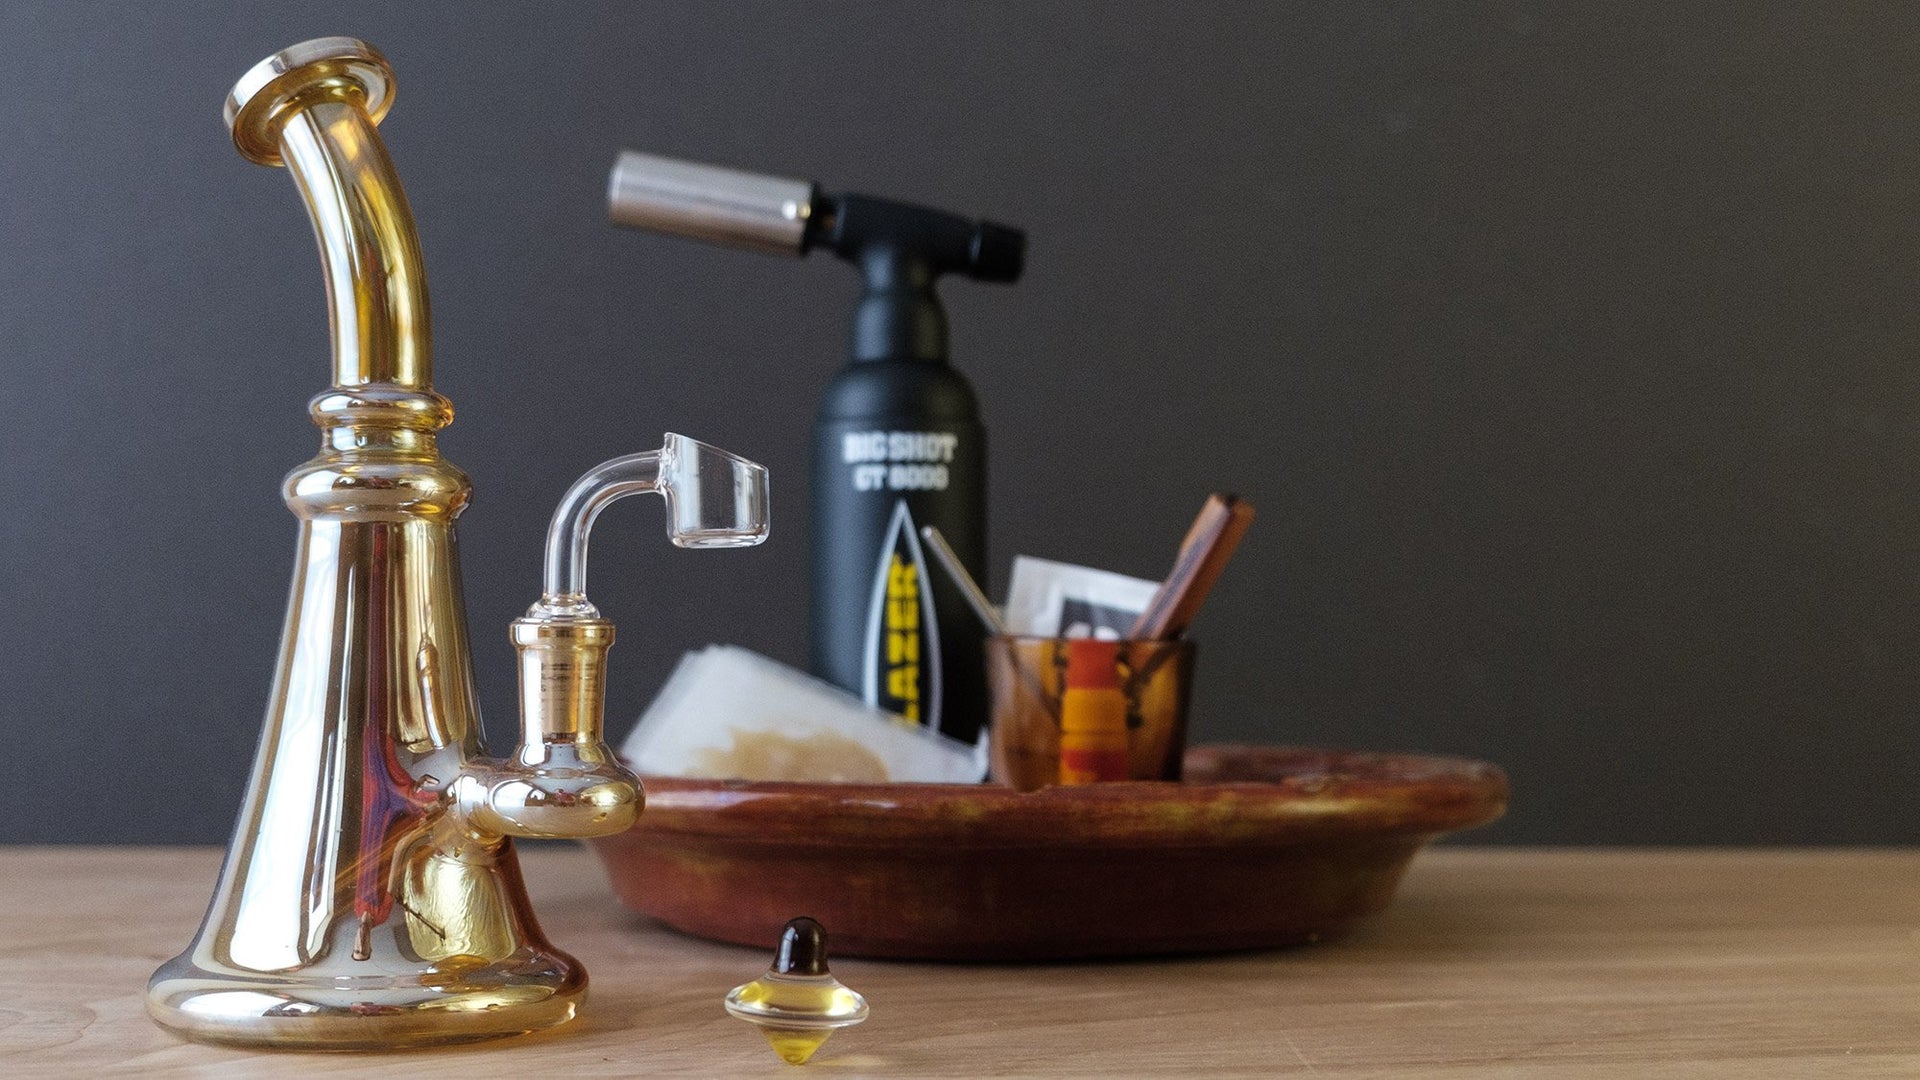 What's the Best Dab Temp? Finding the Perfect Dab Temperature - 420 Science